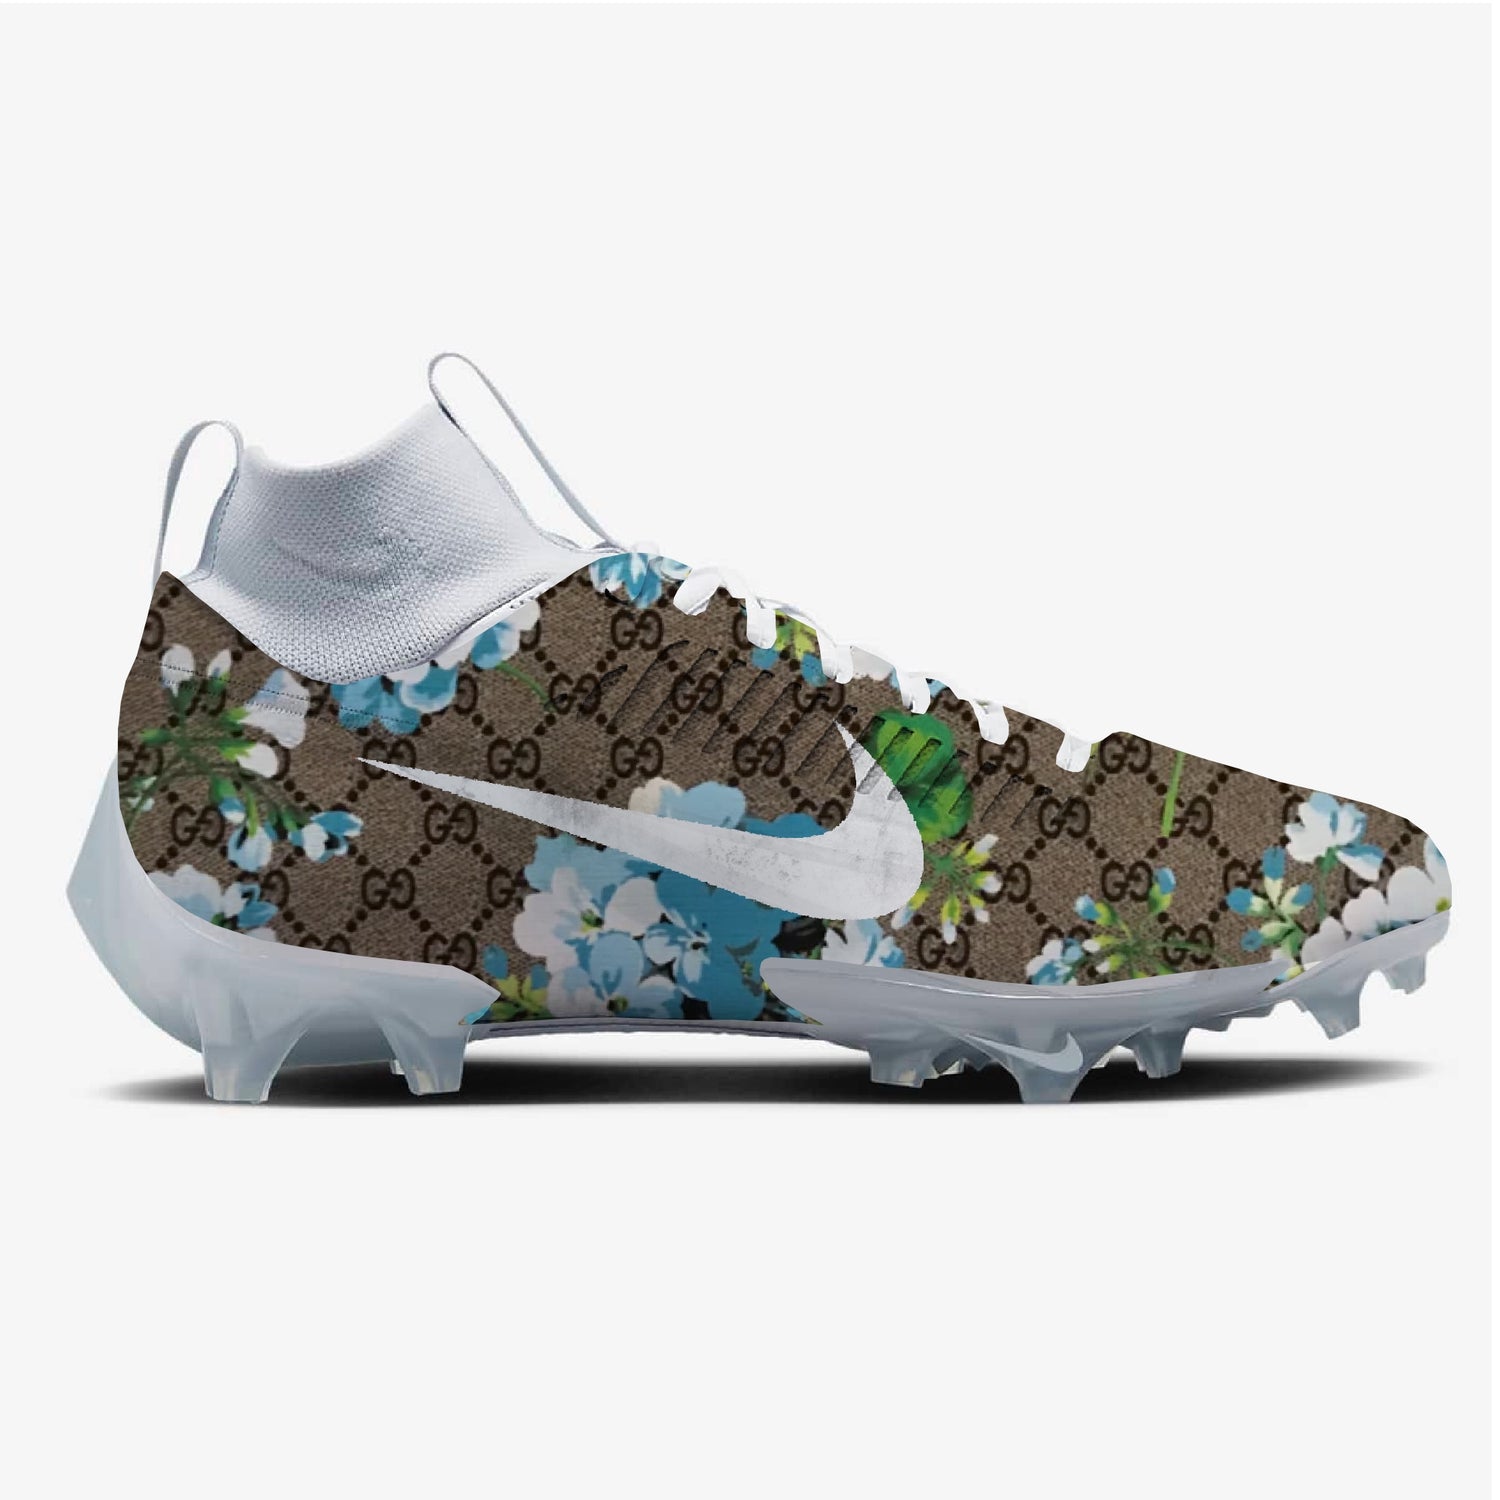 Floral Gucci Nike Football Cleats